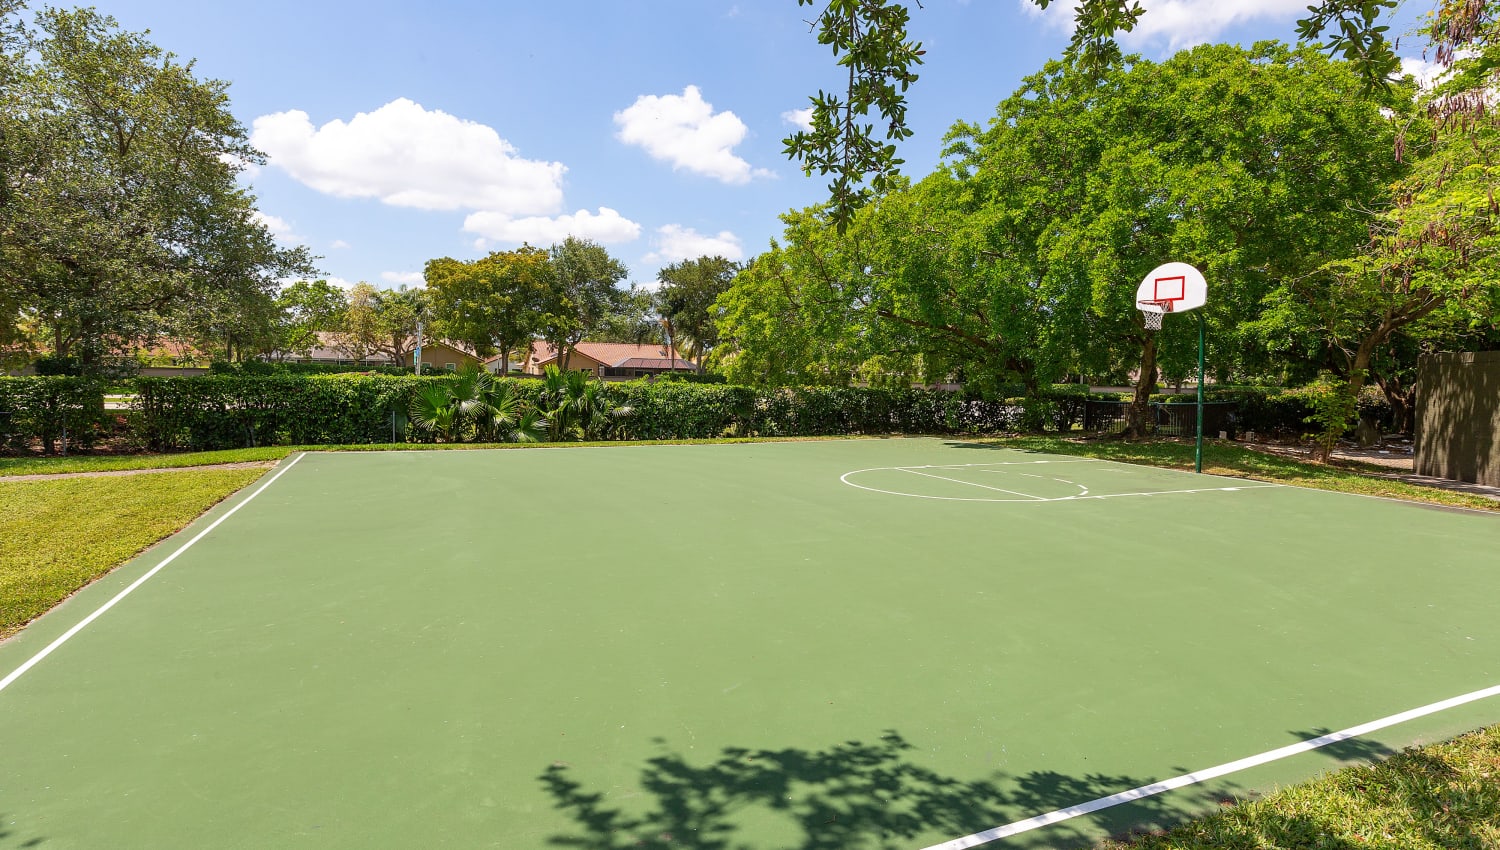 Basketball court at Club Lake Pointe Apartments in Coral Springs, Florida